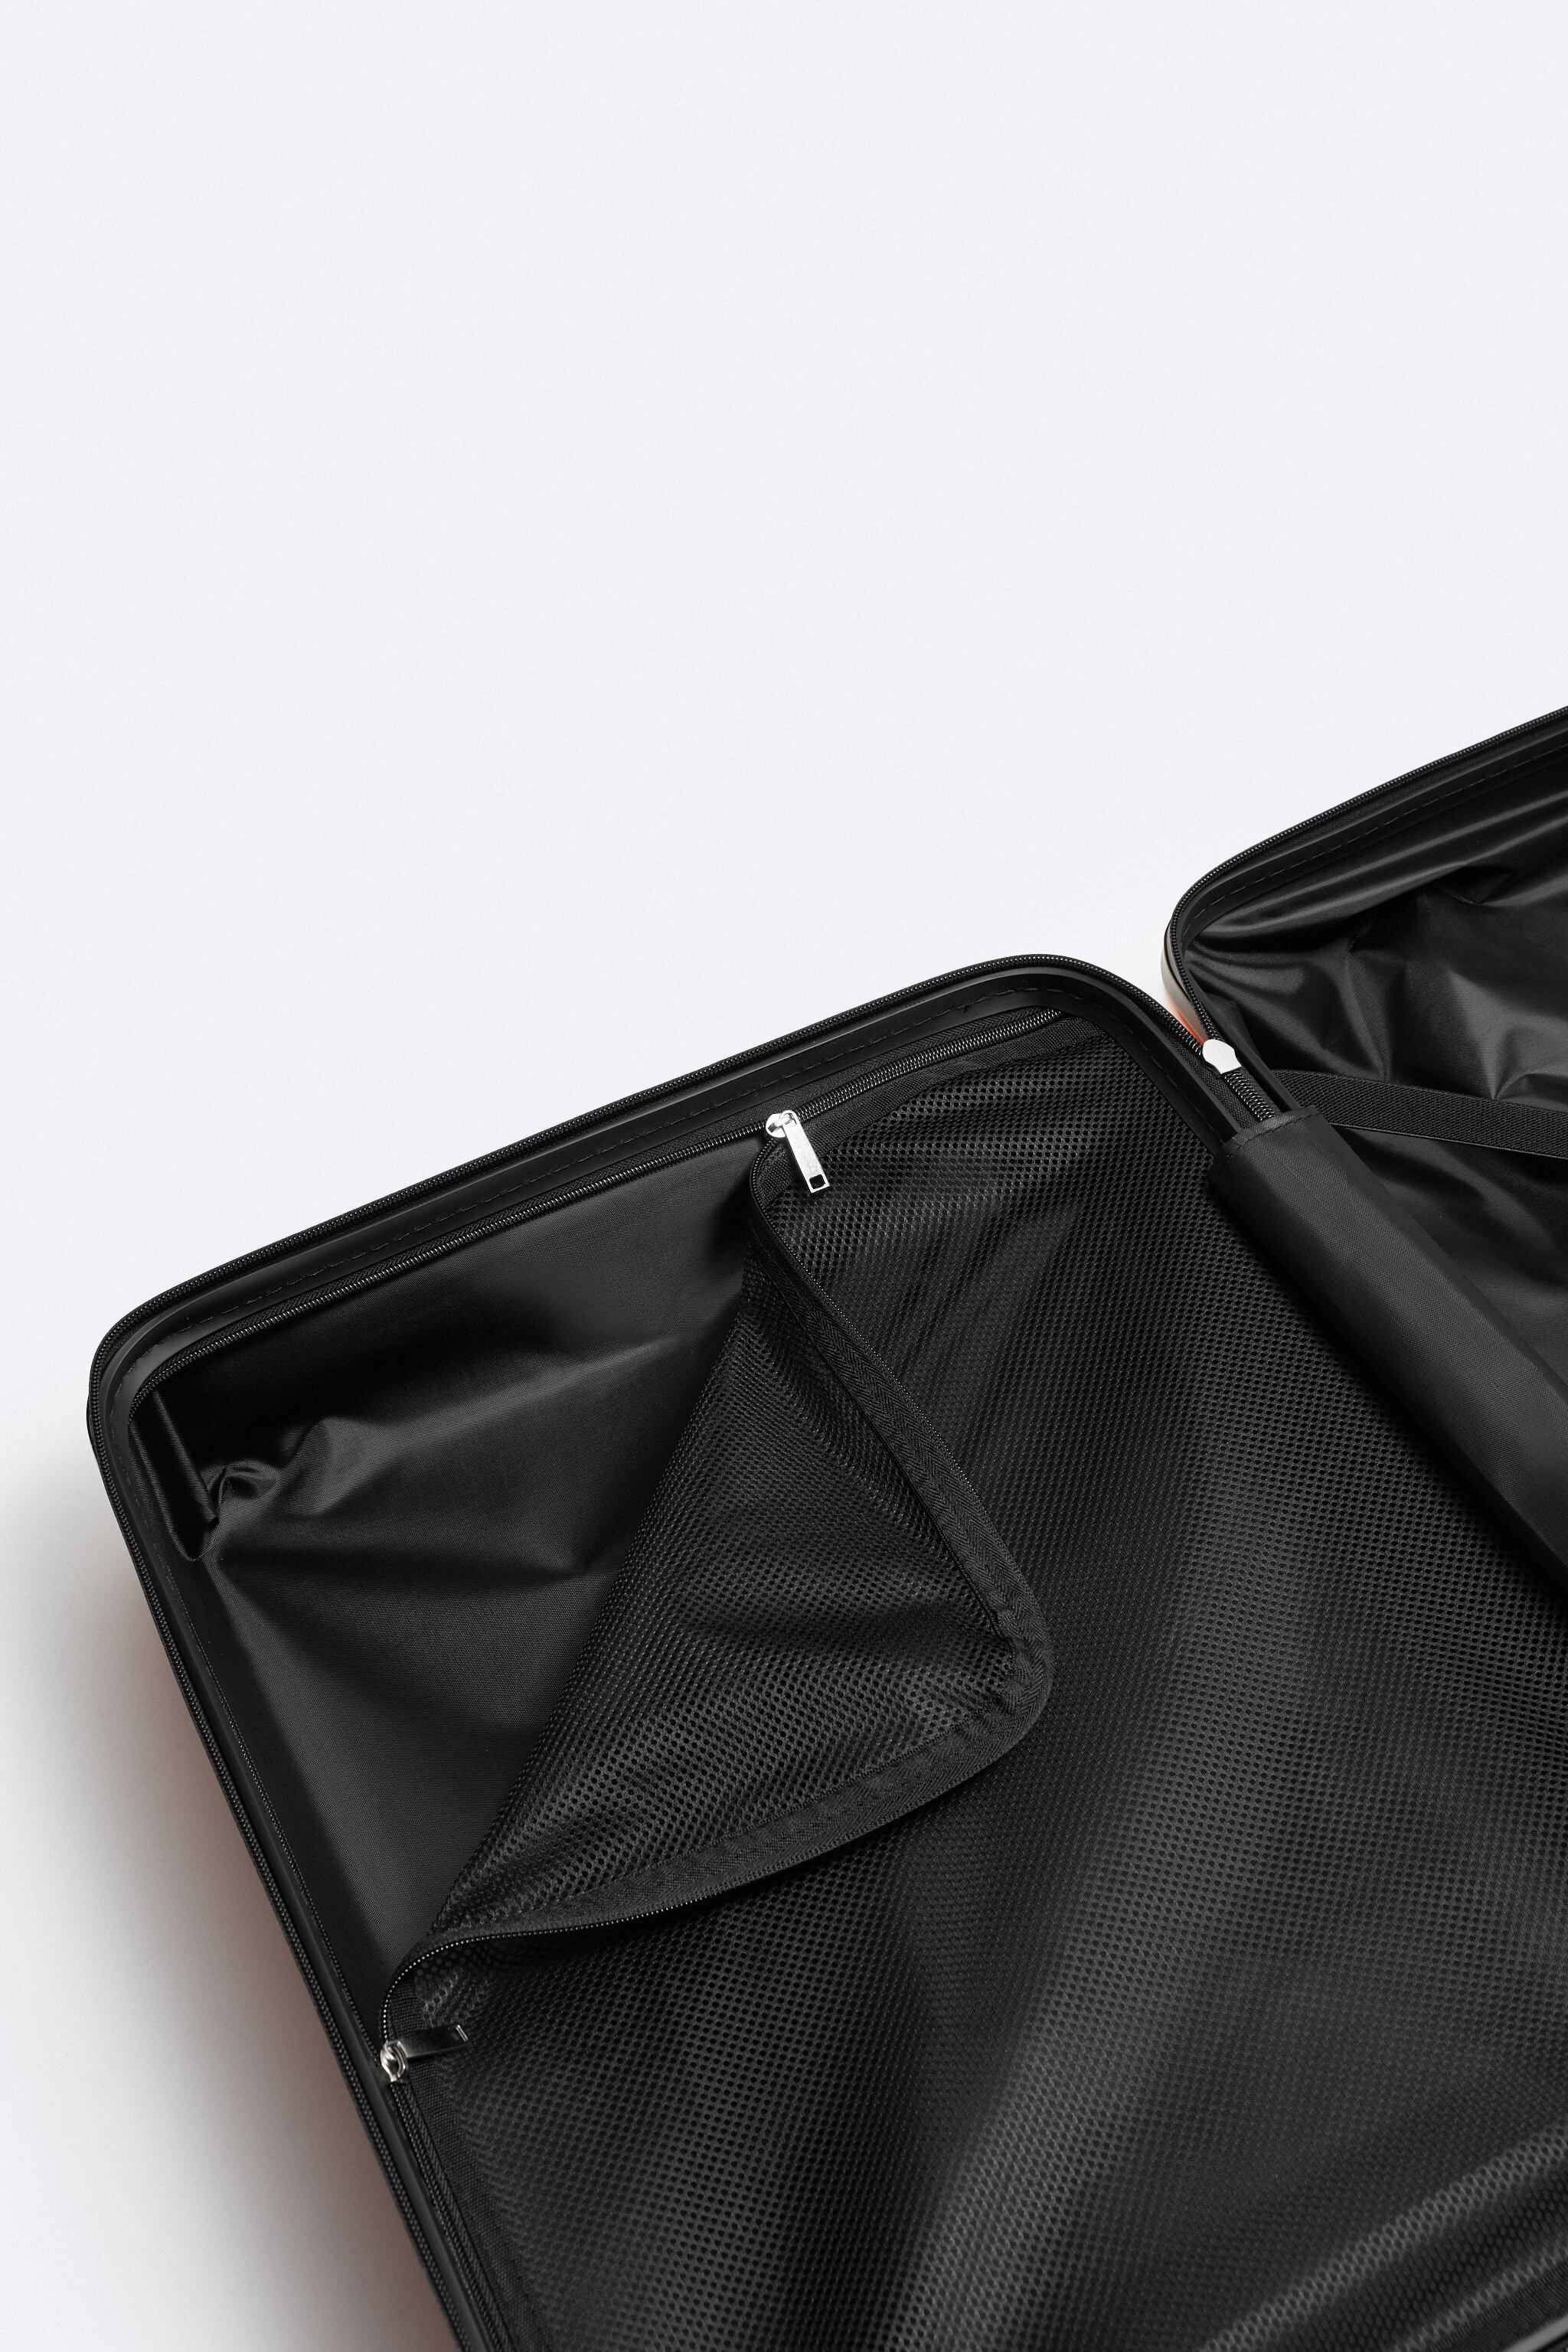 HARDSIDE CARRY-ON SPINNER LUGGAGE